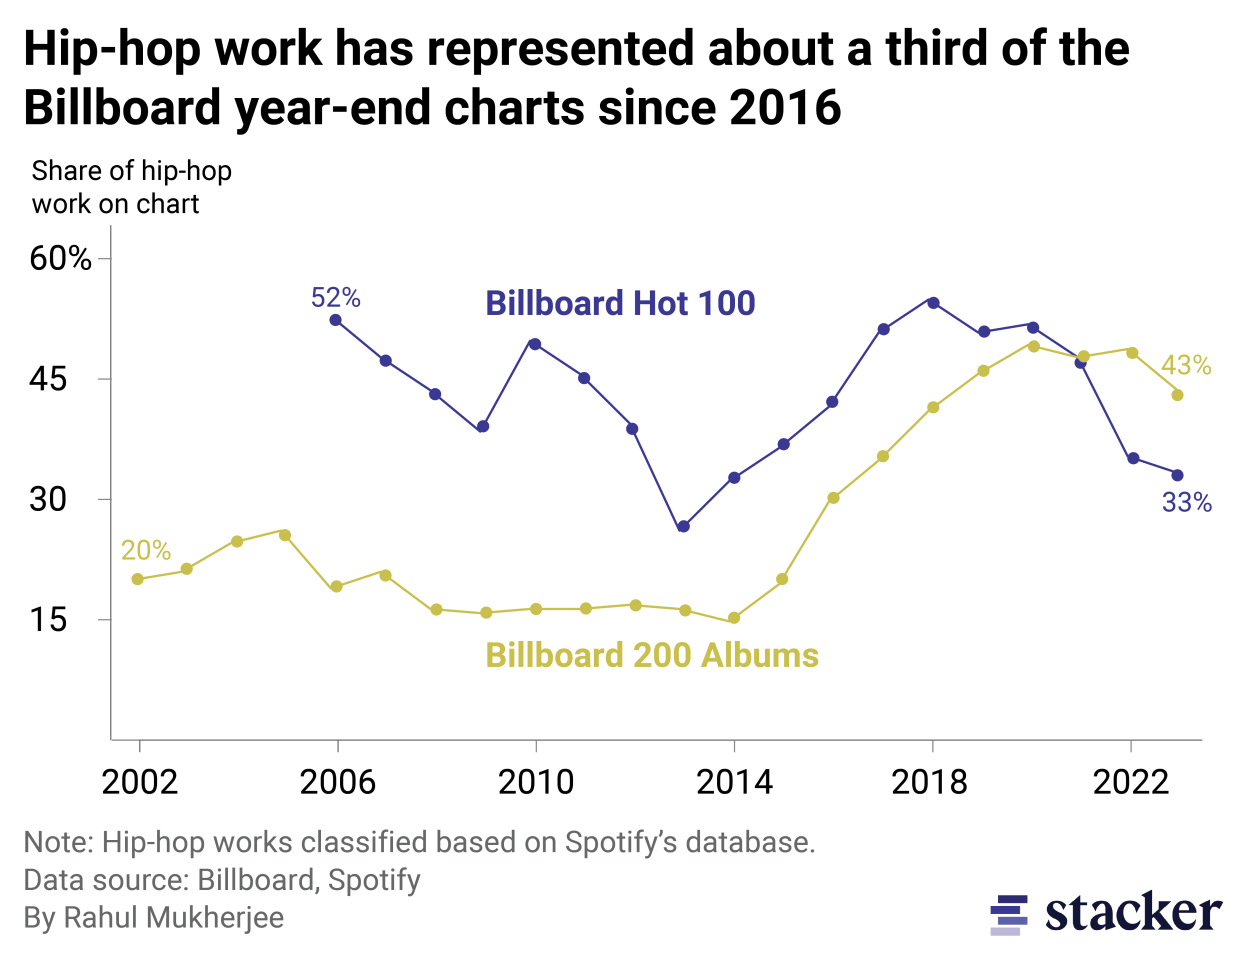 A line chart showing the share of hip hop works on the billboard end of year charts for singles and albums. Hip-hop singles usually remain about 33 percent, but albums have risen to nearly half of the slots.